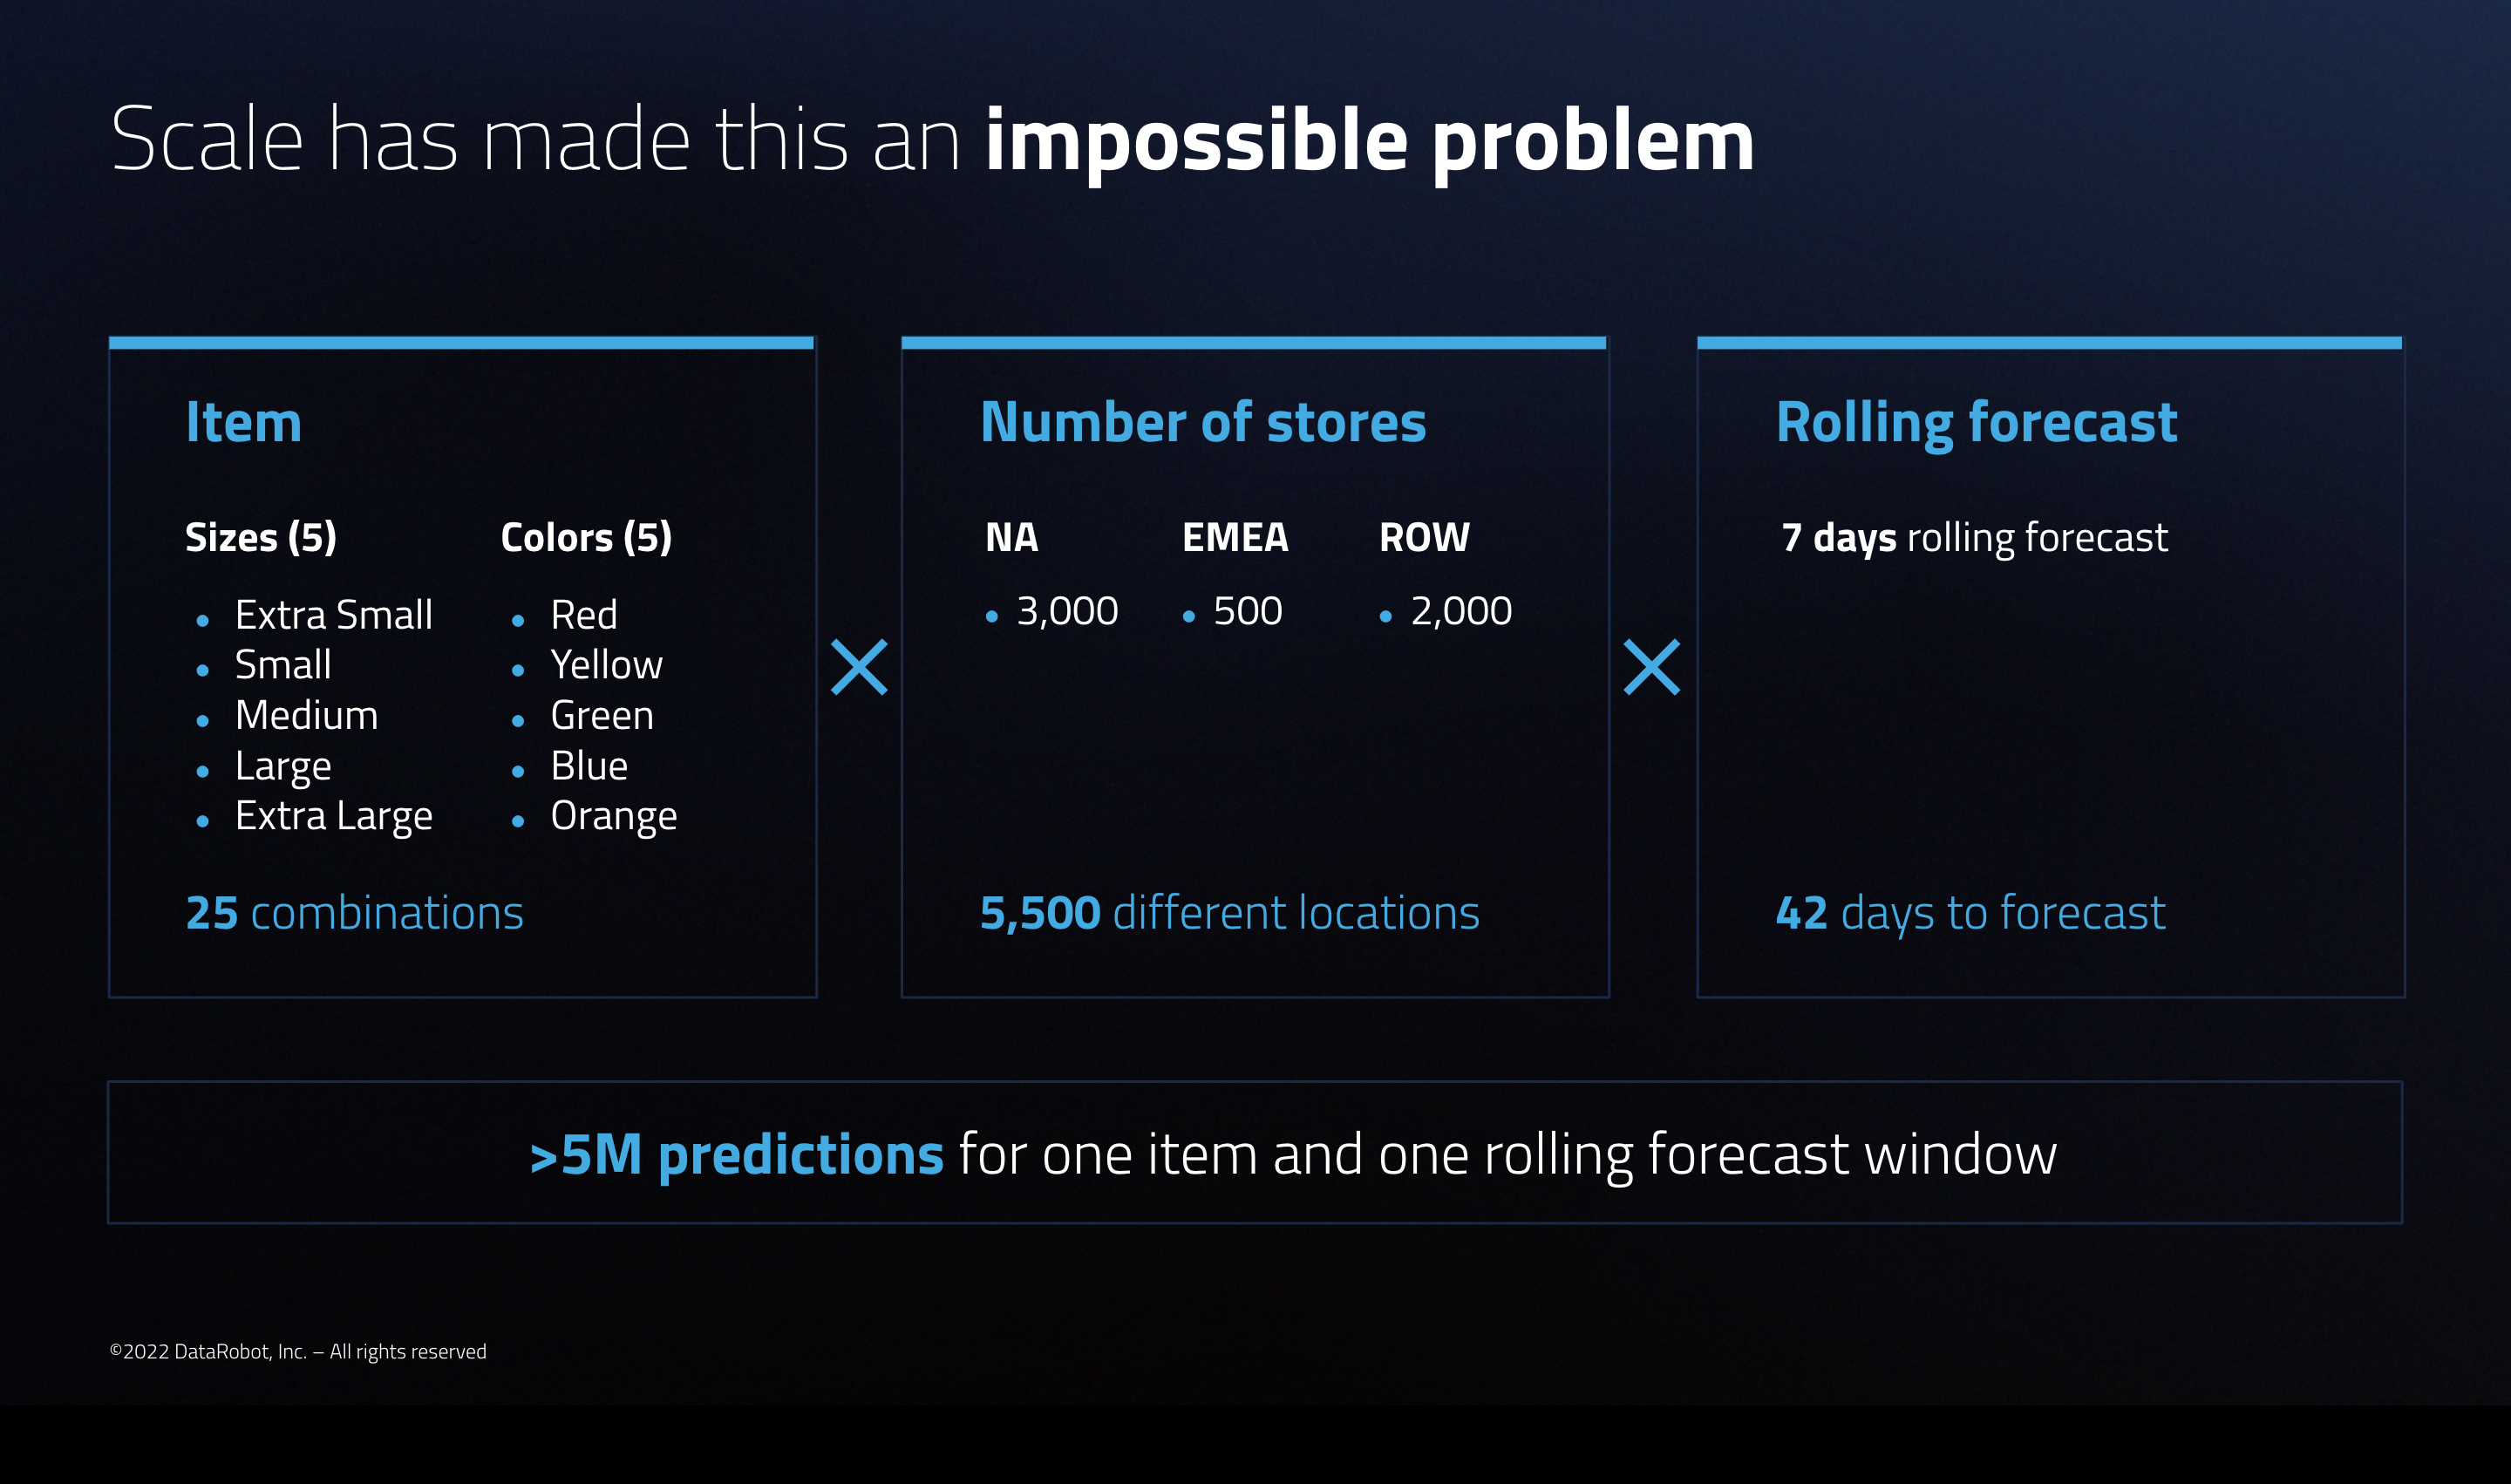 Forecasting for one single item leads to more than five million predictions
